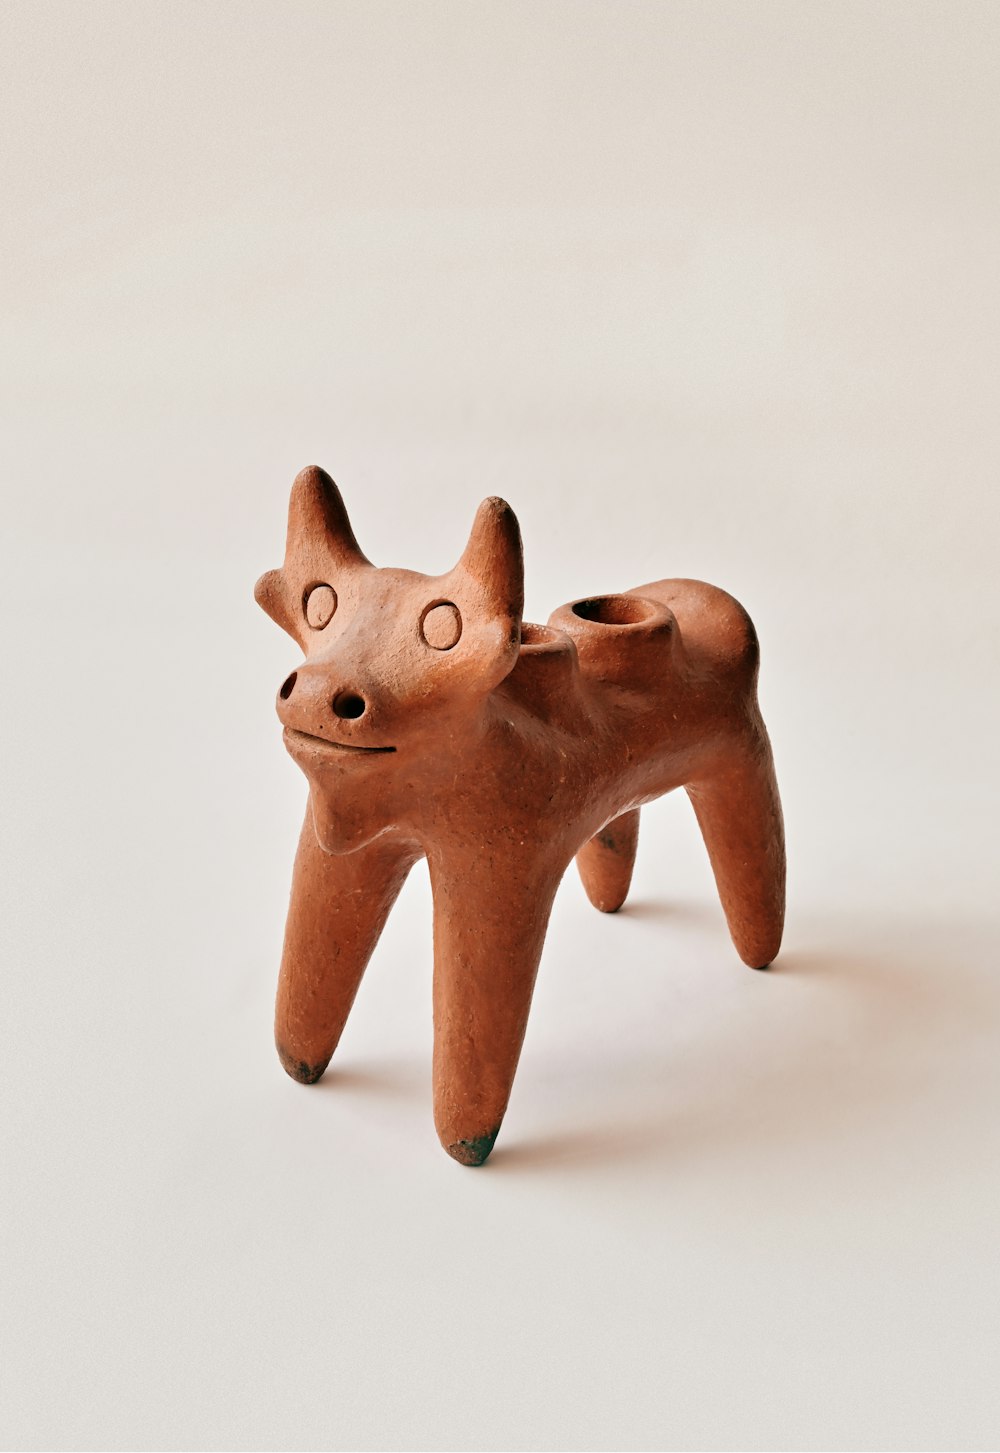 brown wooden animal figurine on white surface